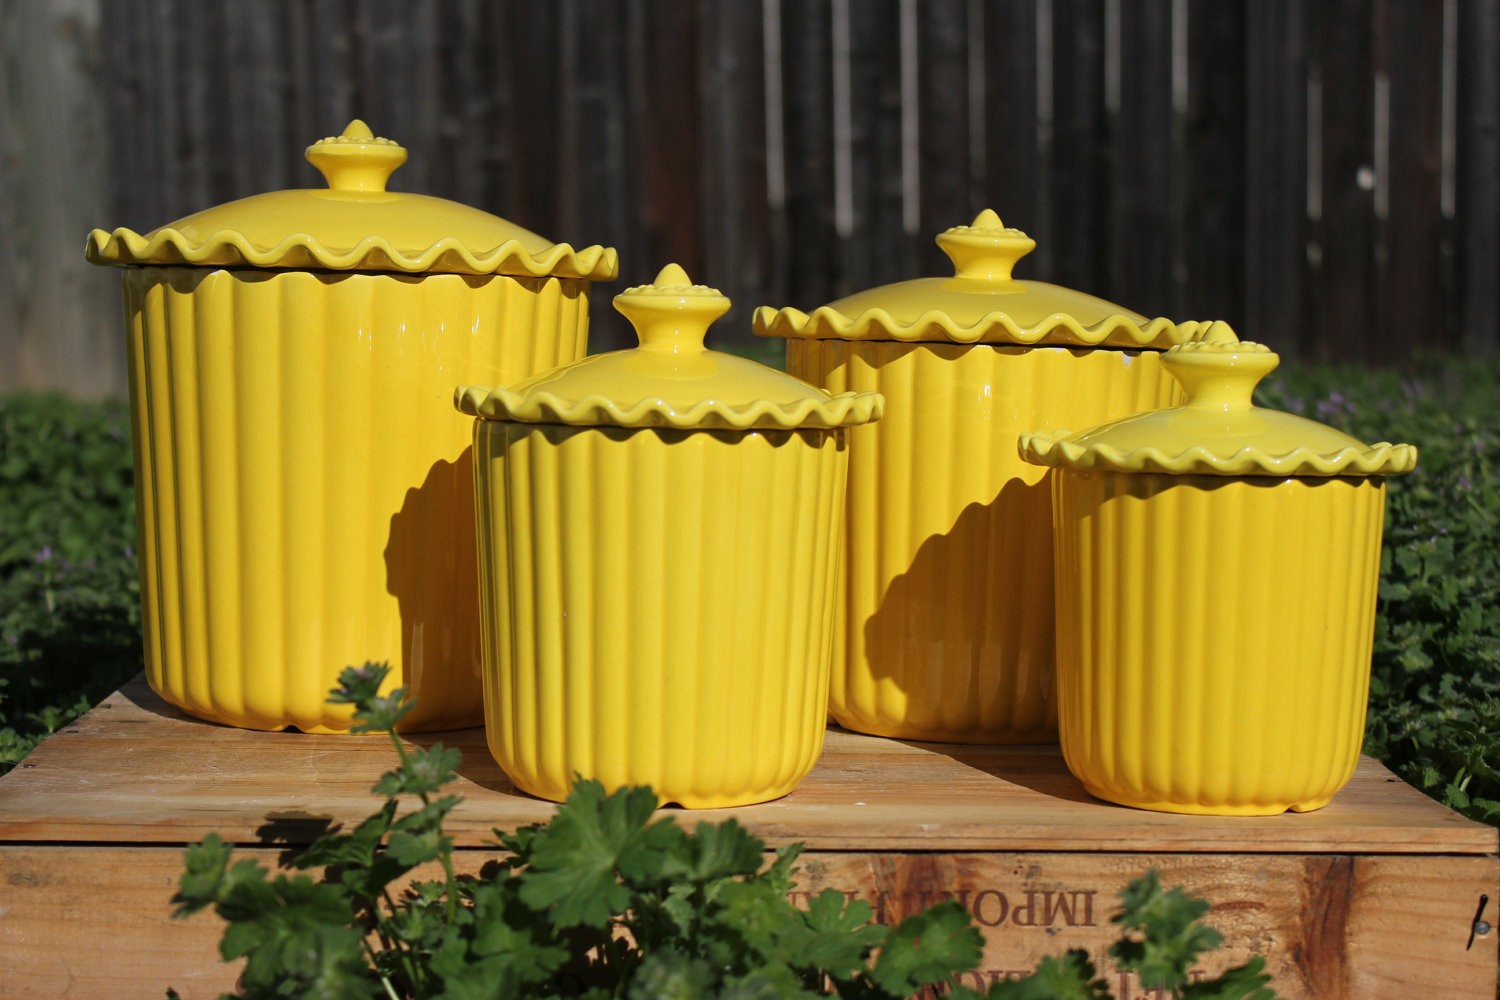 Cheery yellow ceramic kitchen canisters